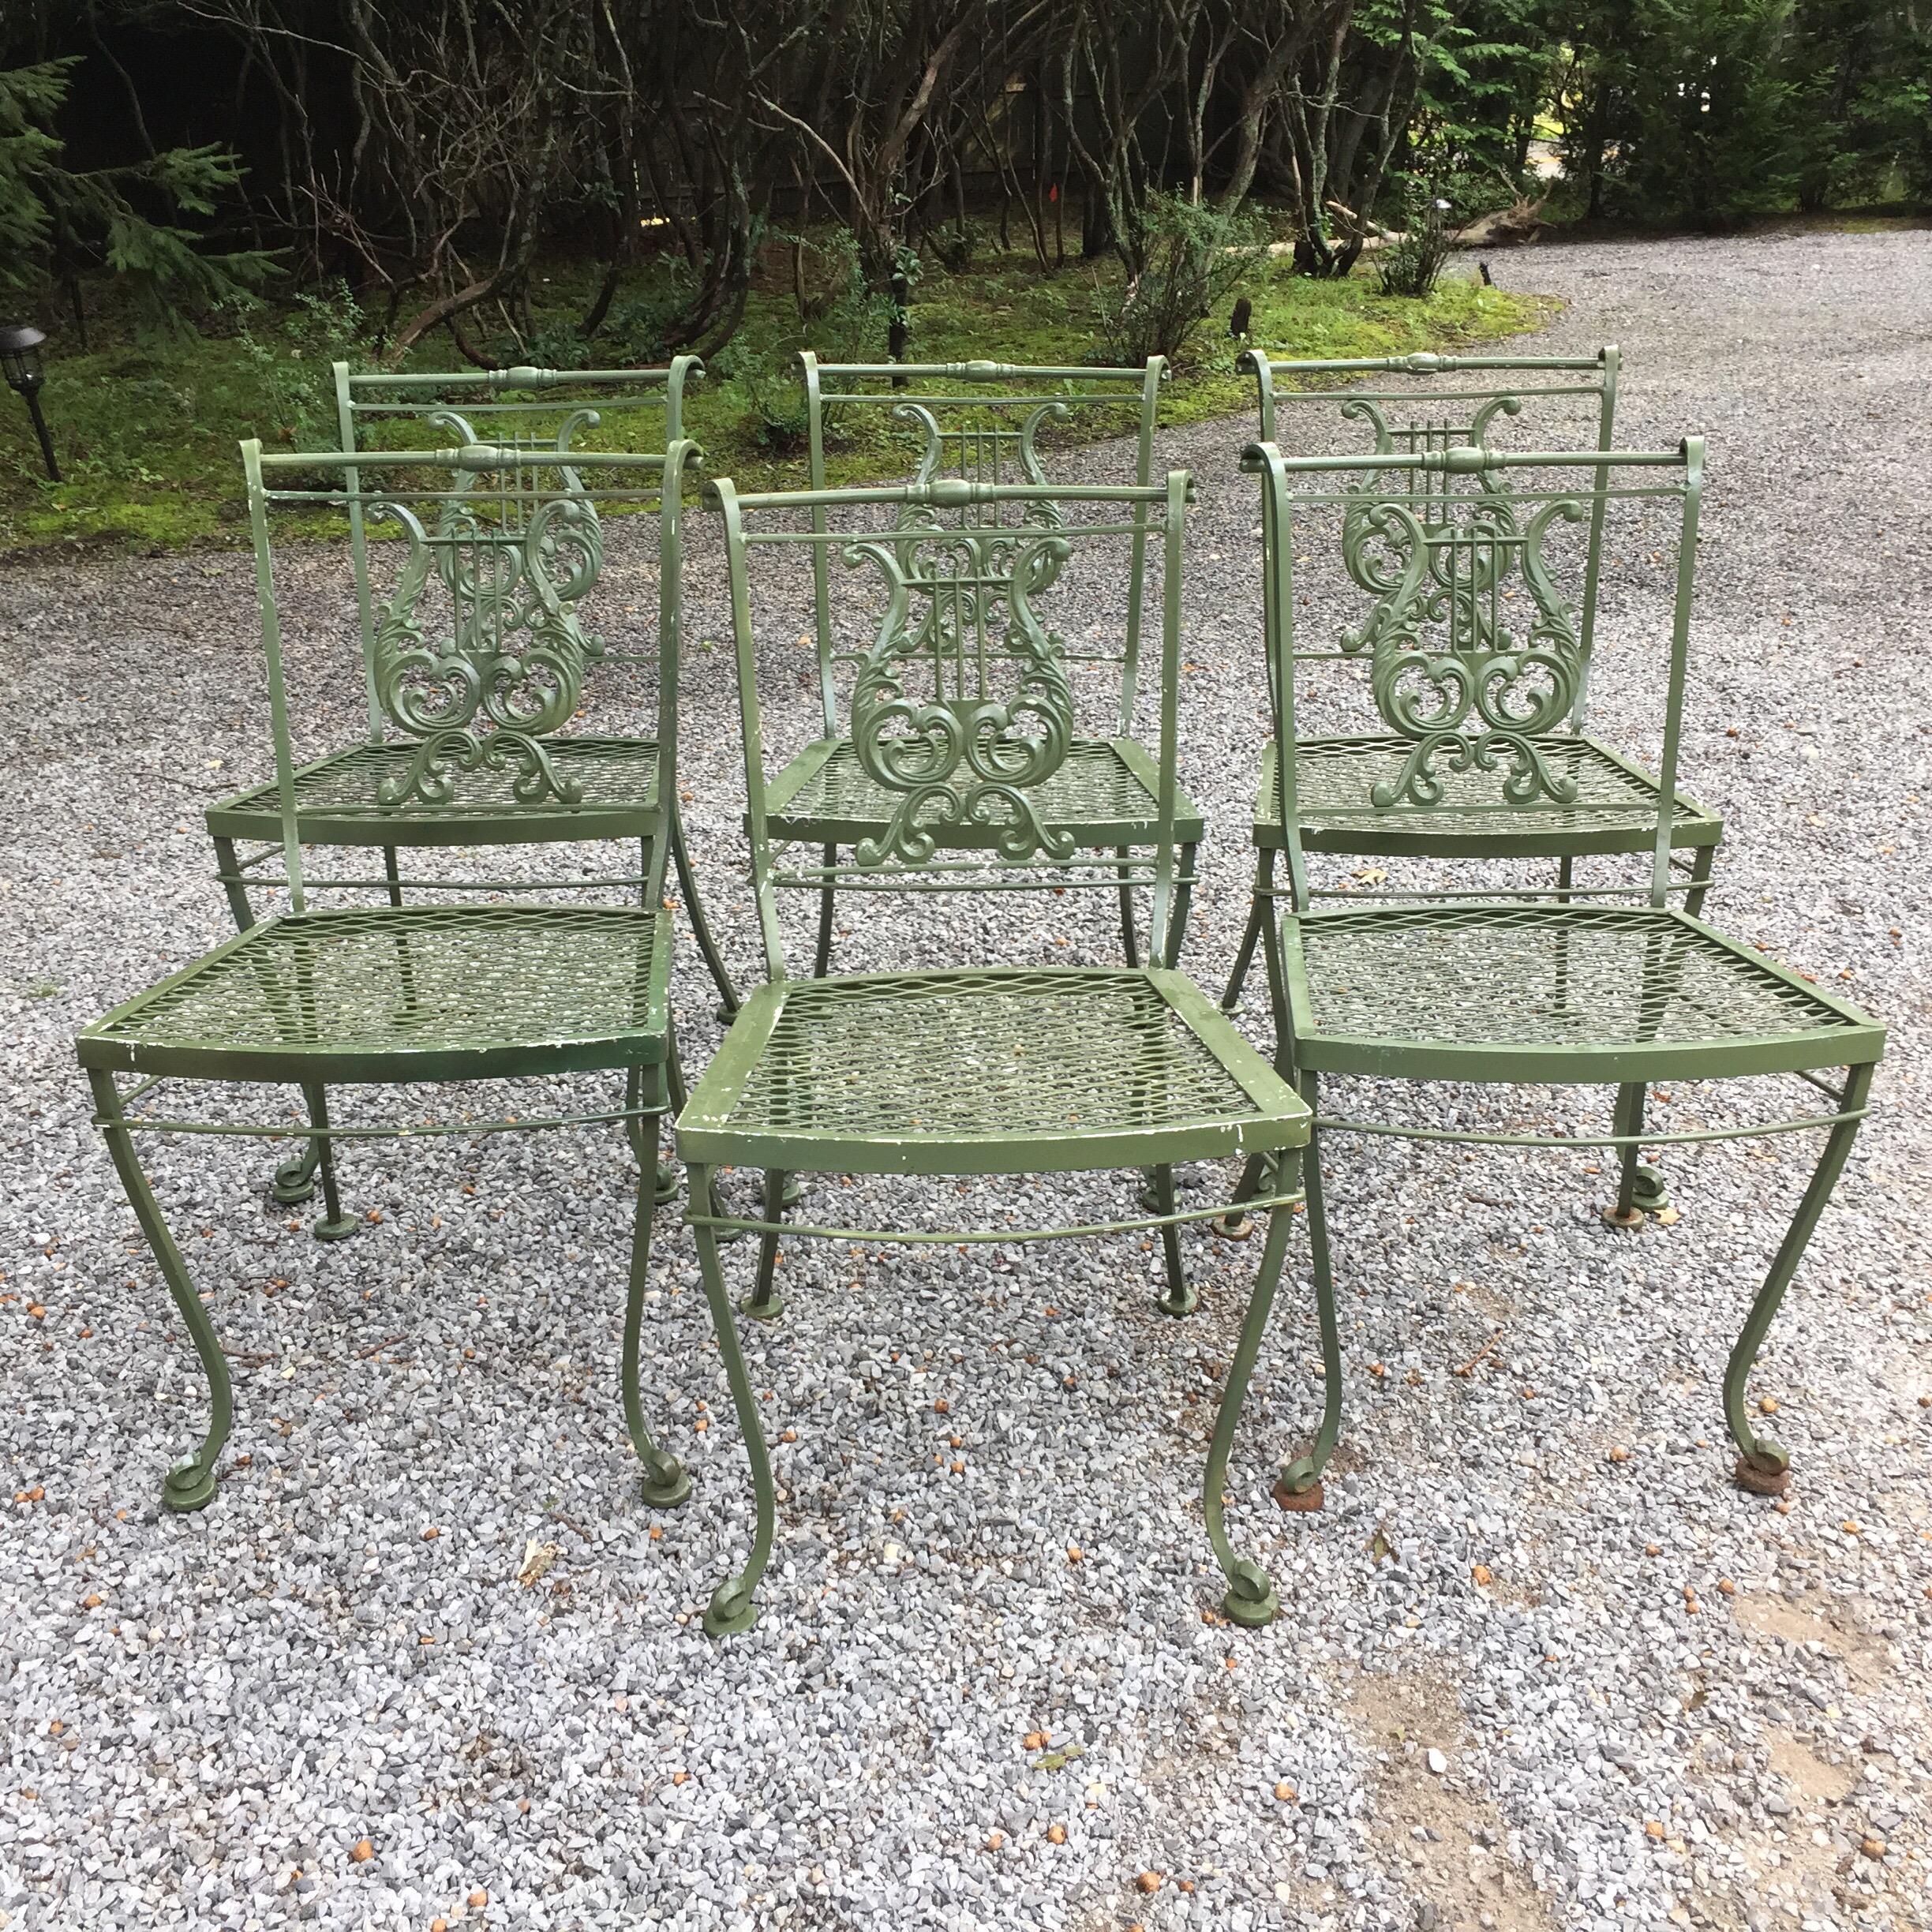 Beautiful 1960s garden chairs in wrought iron. The chairs with graceful form and details, with a lyre back design. A Set of six chairs,
The dimensions are: 31.5